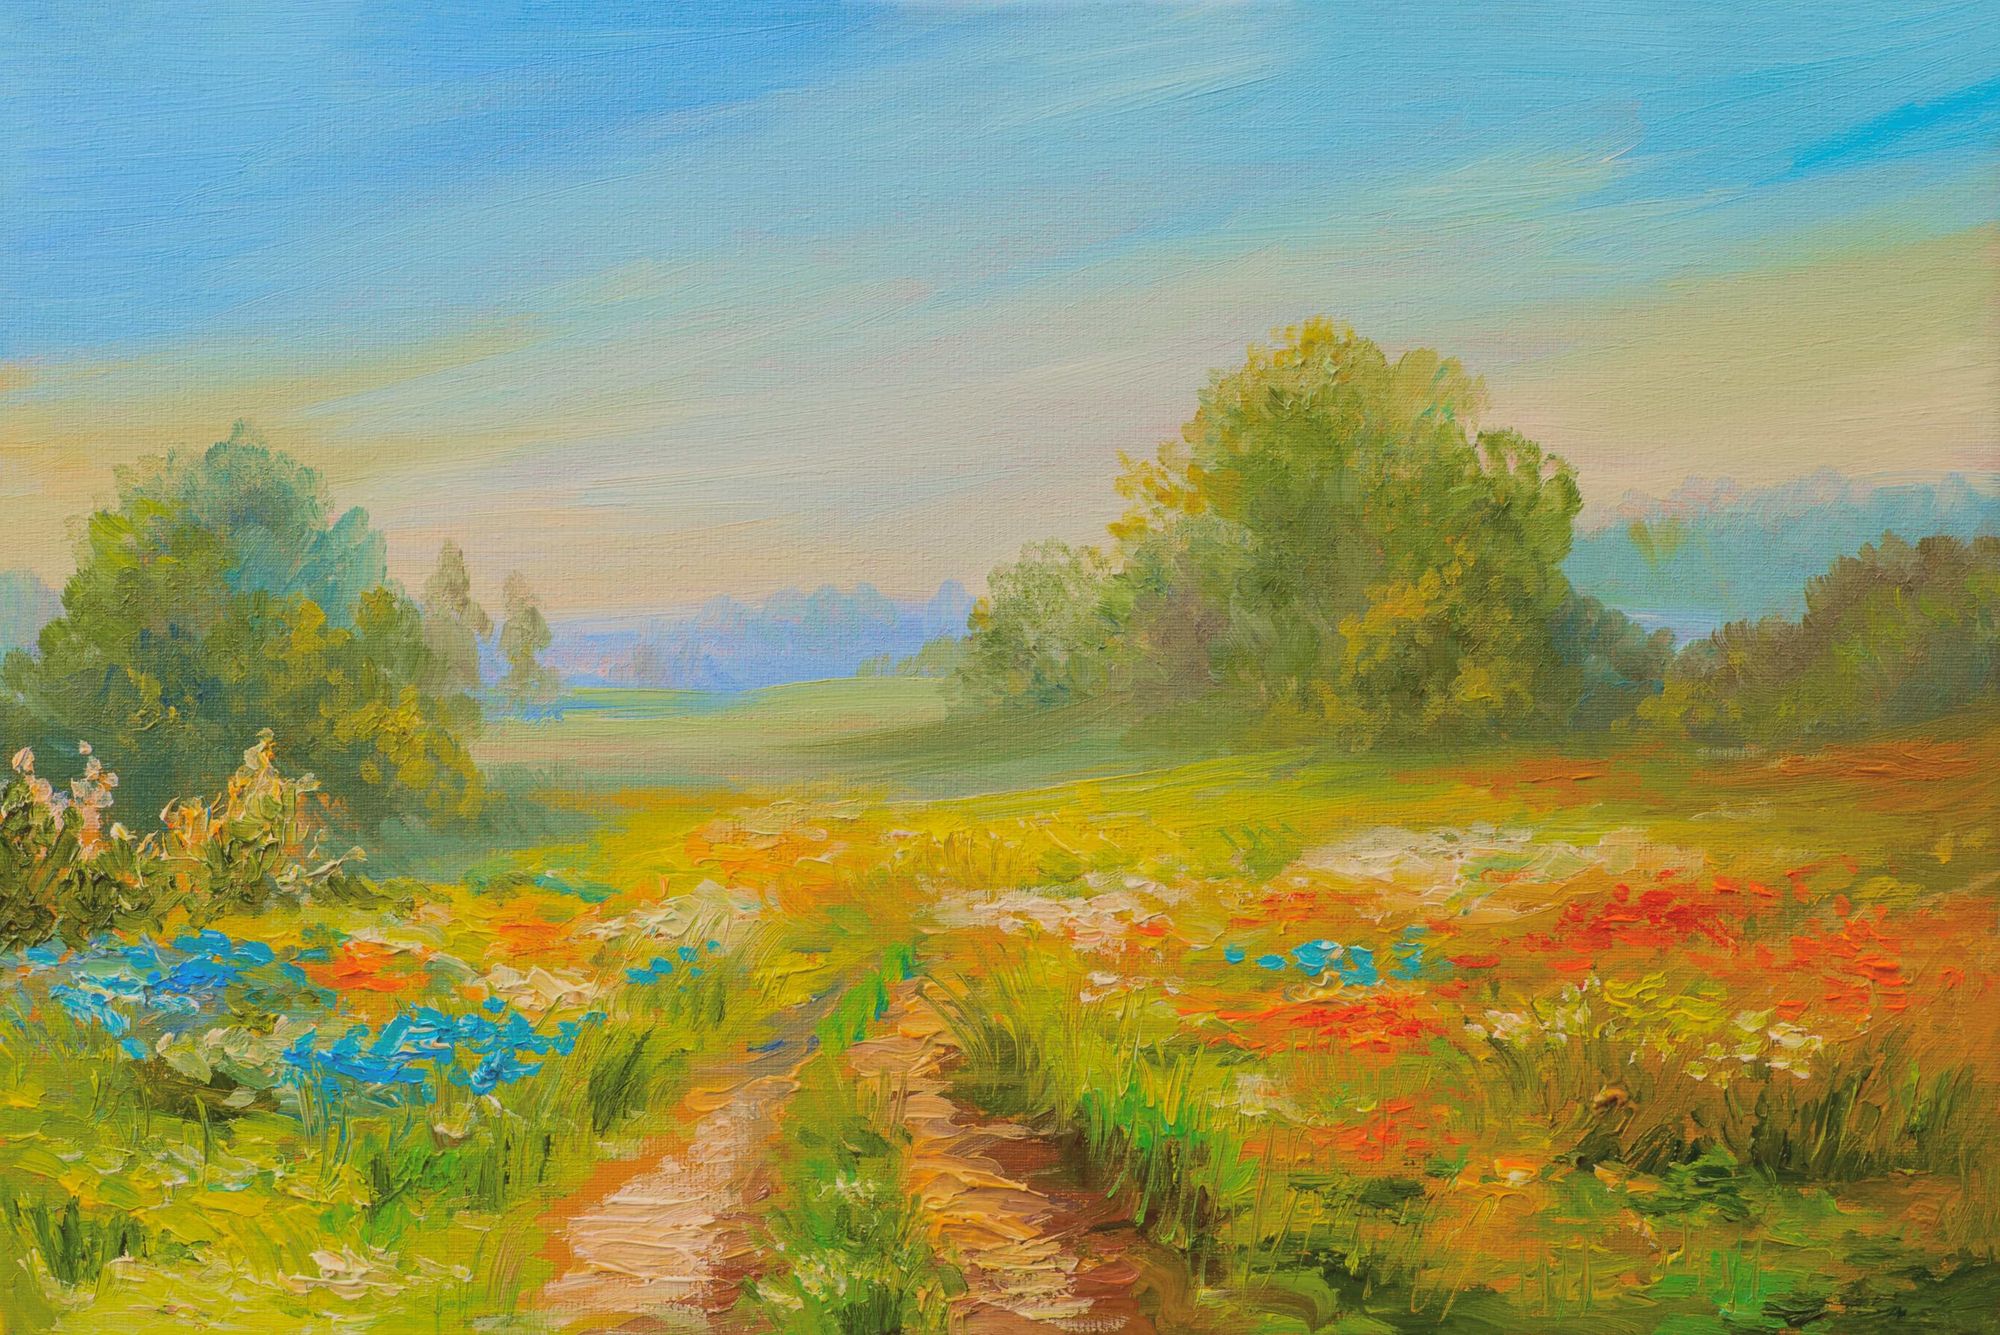 Screenshot of one of the new wallpapers: an oil painting of a flowered field in bloom